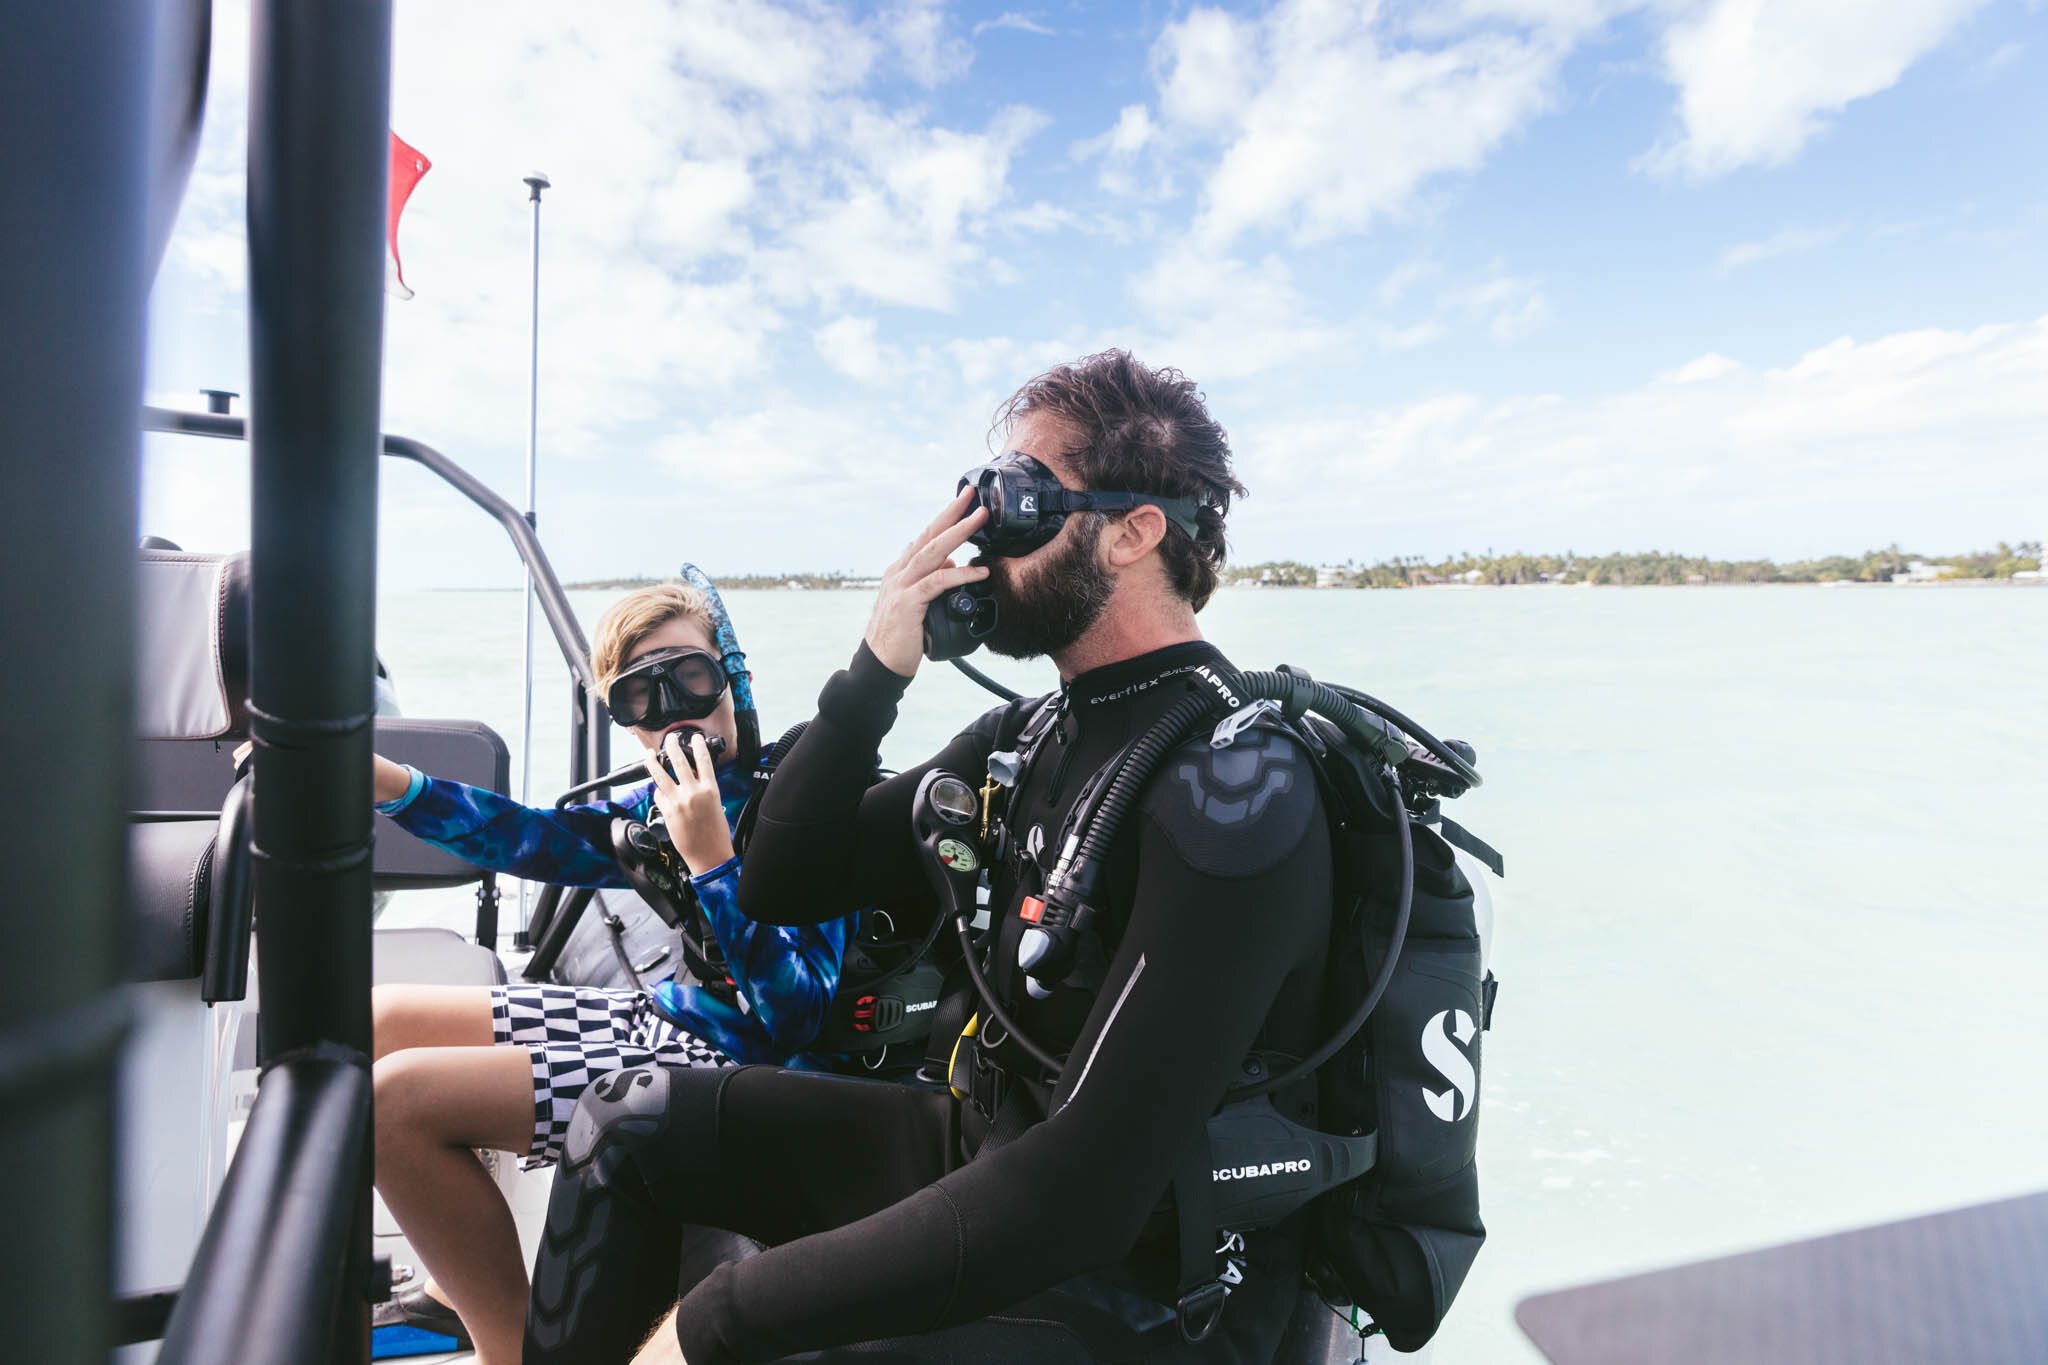  Father And Son In Scuba Gear Prepare To Dive From A Boat Into The Crystal Clear Atlantic Ocean Off The Islands Of Islamorada Florida’s Private Beach. 